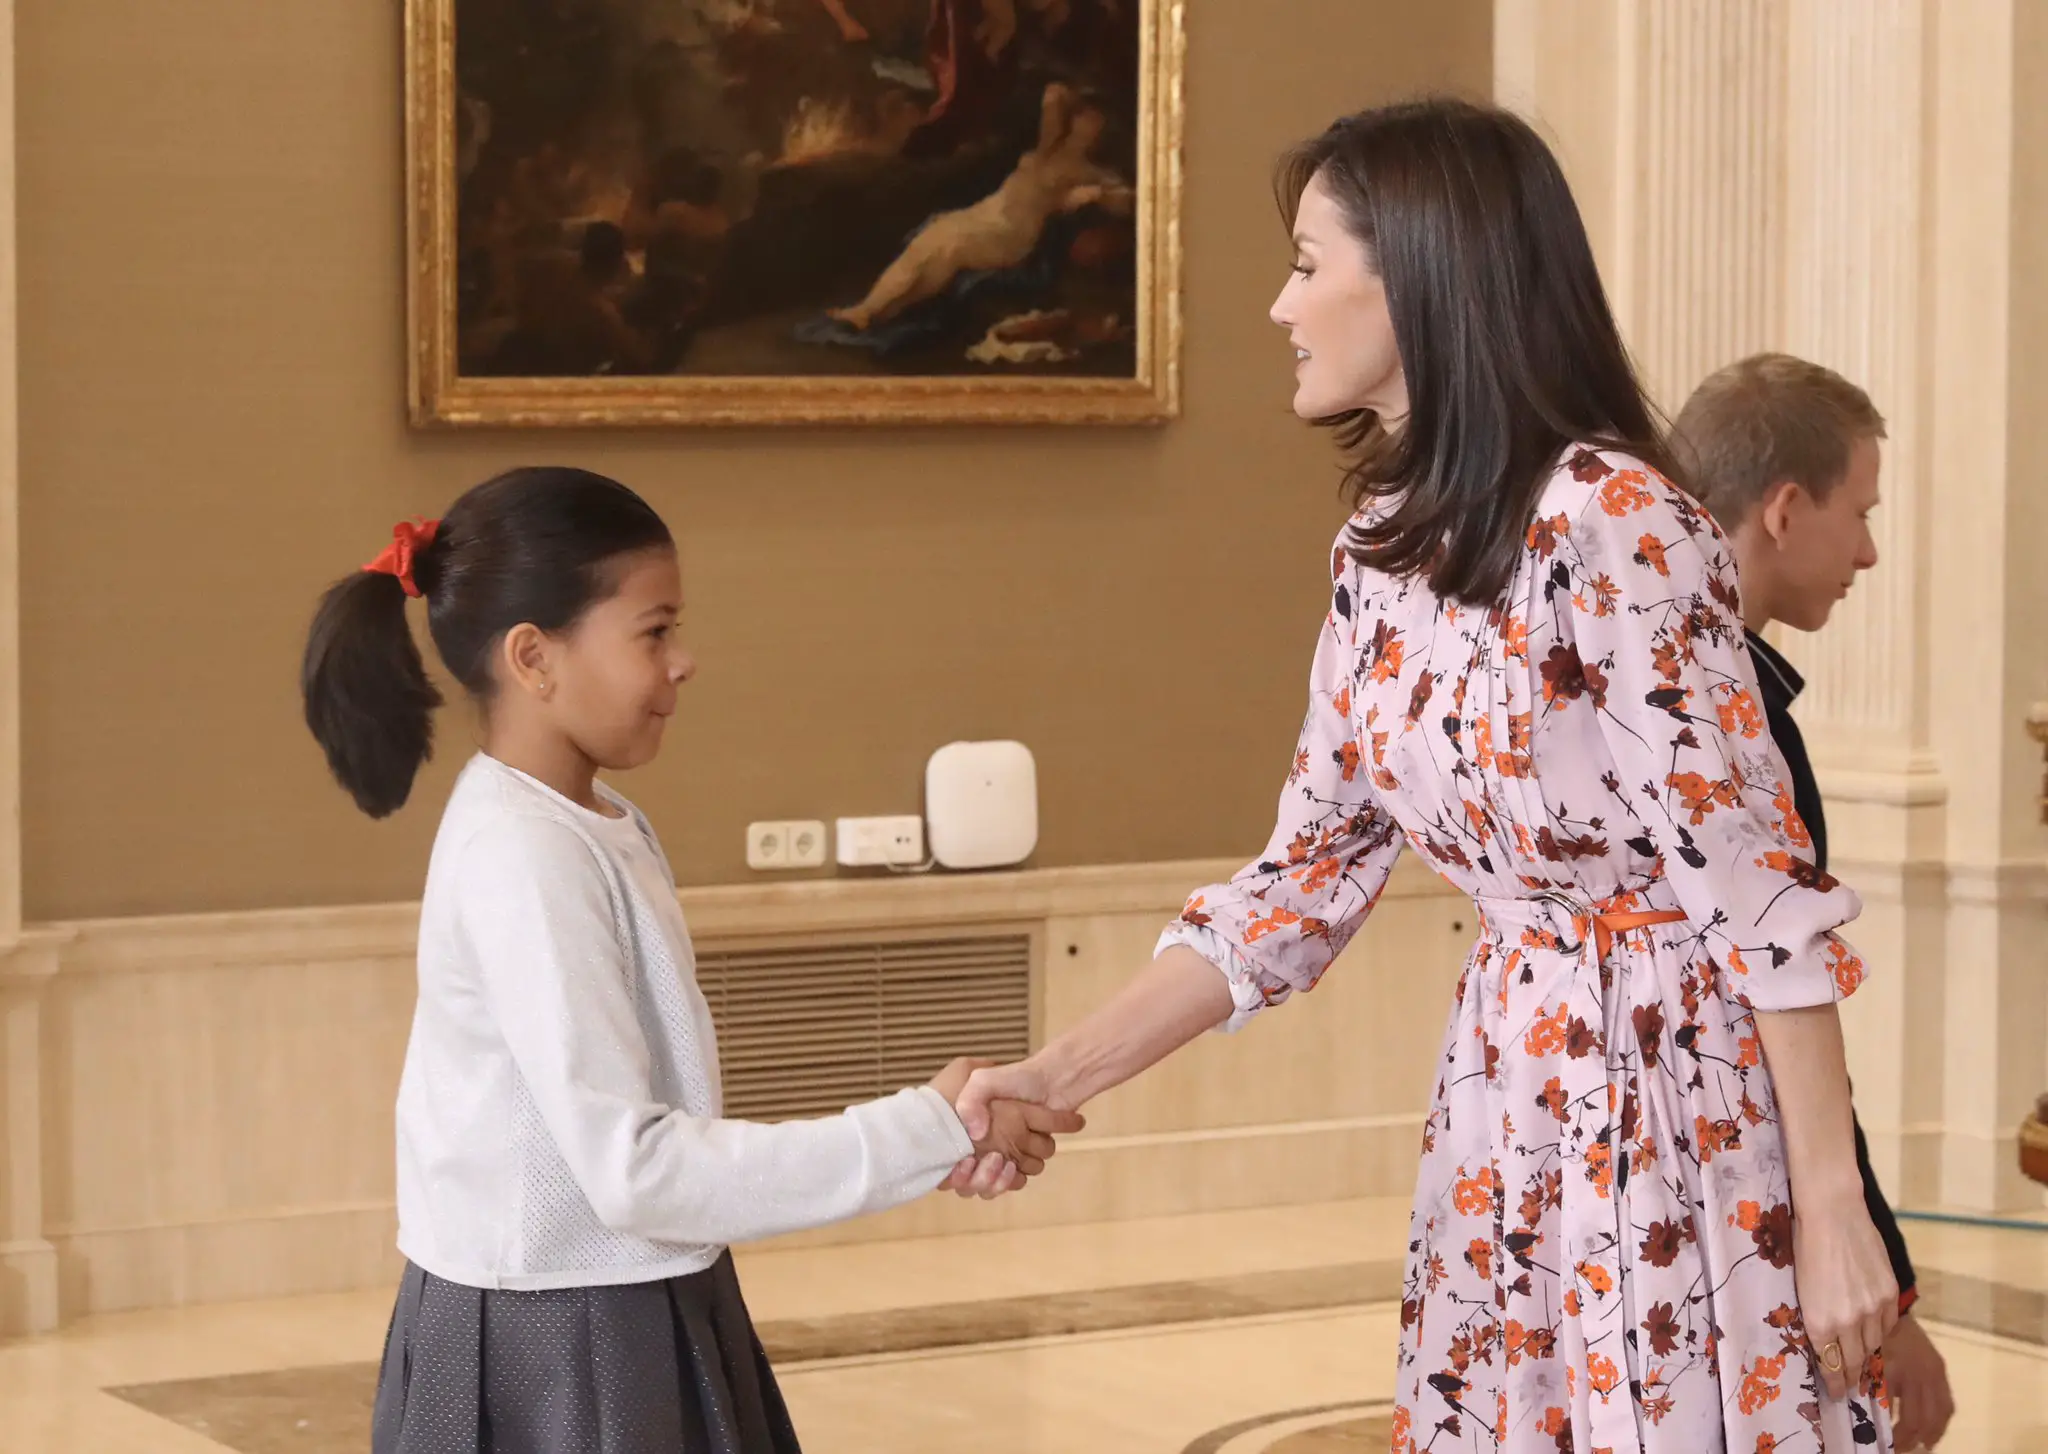 Queen Letizia recieved audience at the Palace